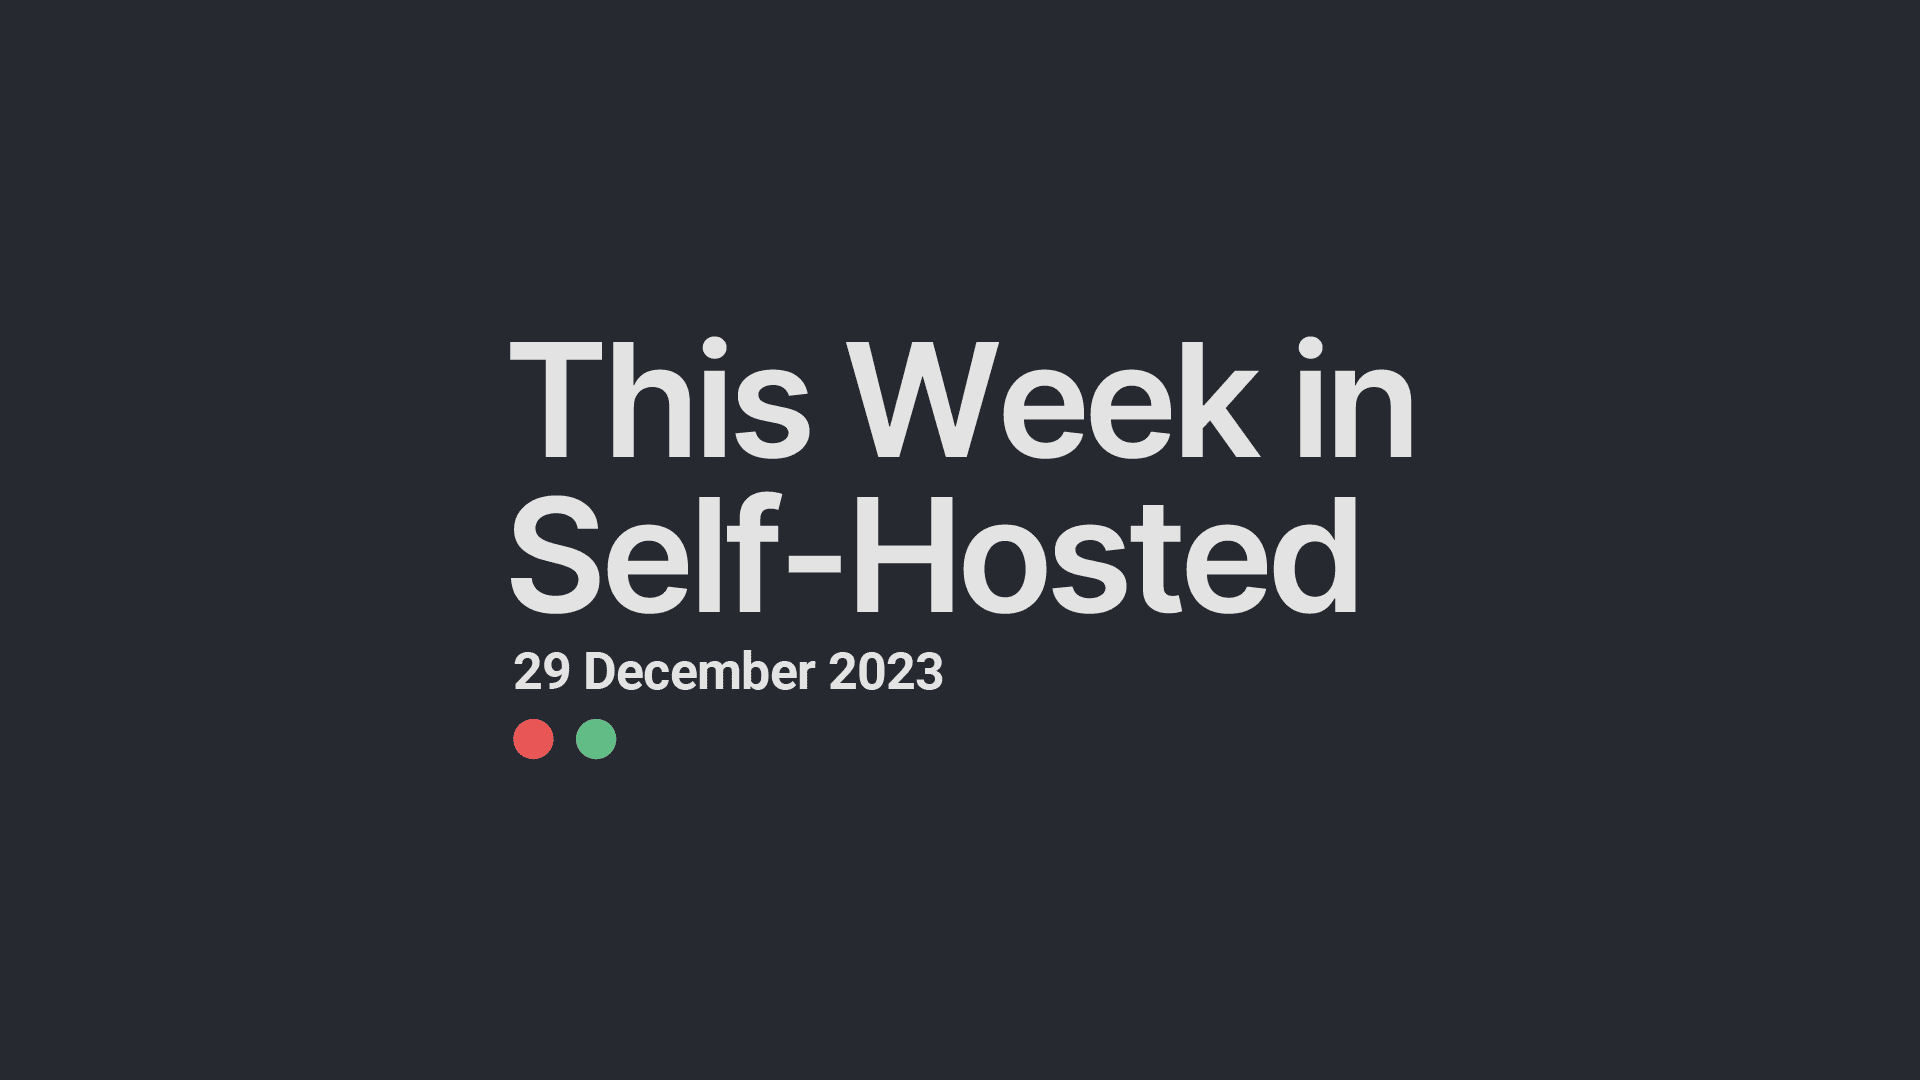 This Week in Self-Hosted (29 December 2023) Post image